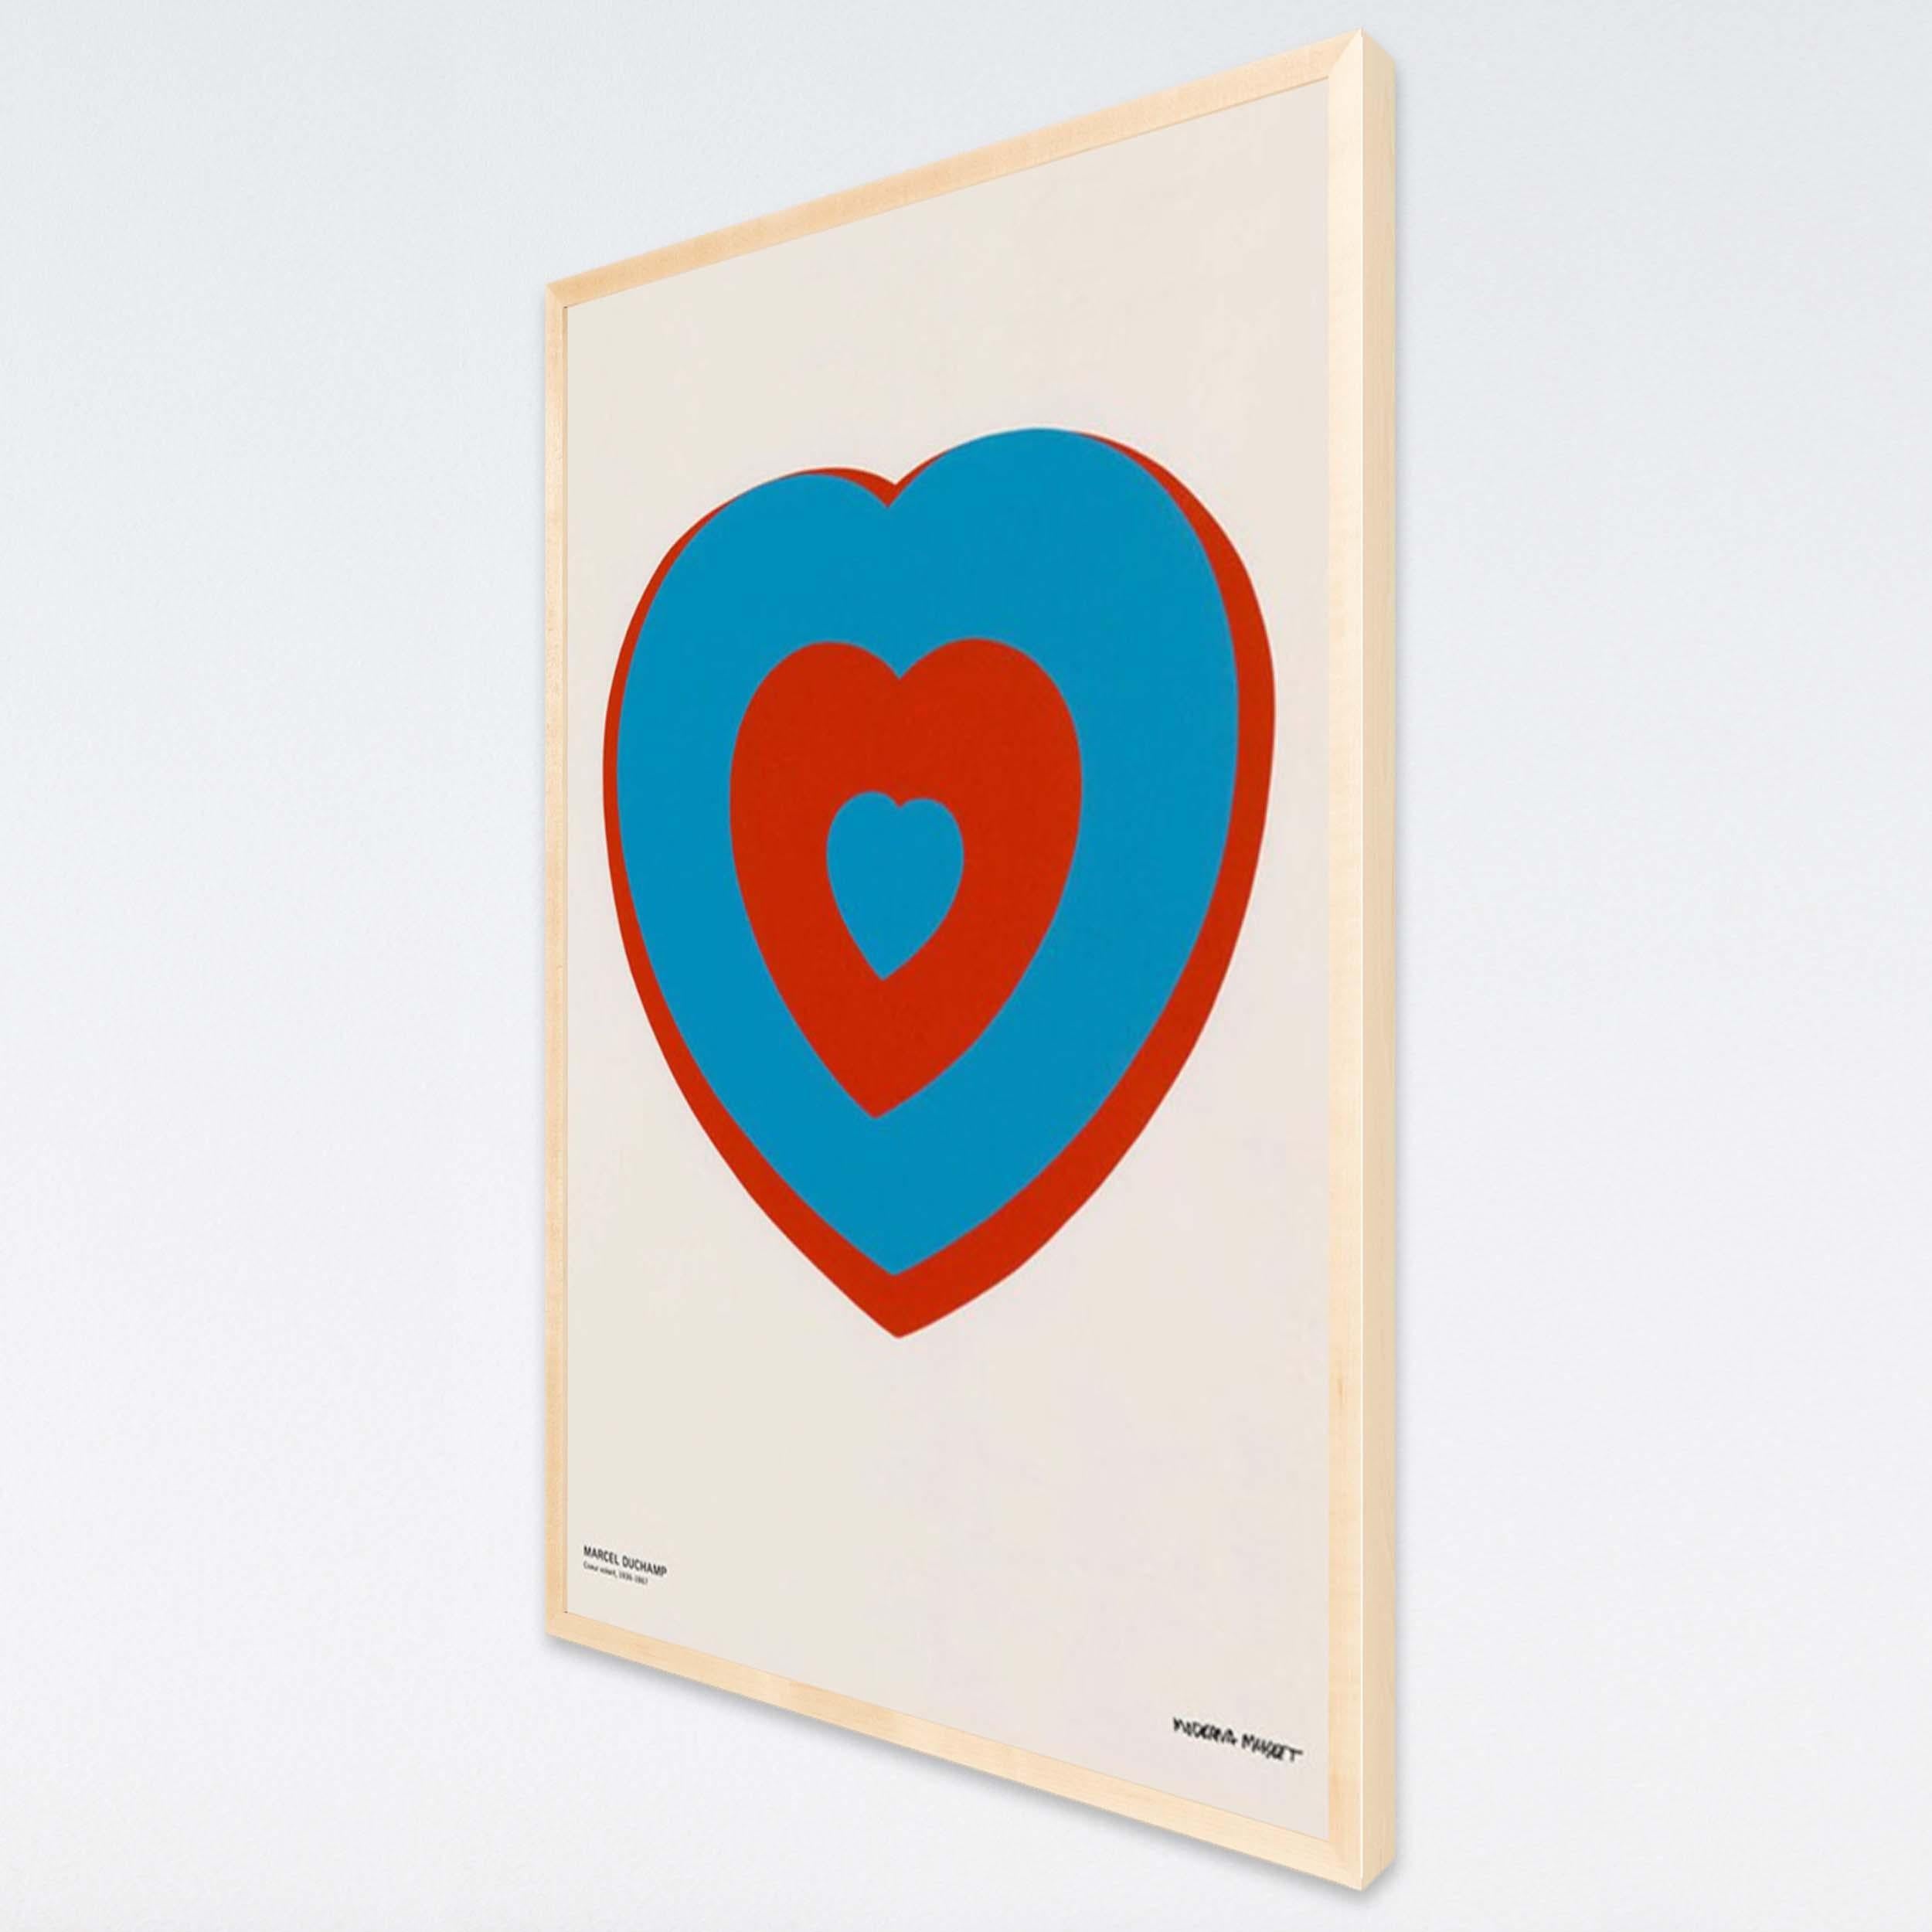 Coeur Volant (Fluttering Heart), Museum Poster Large Oversized Blue Red 2